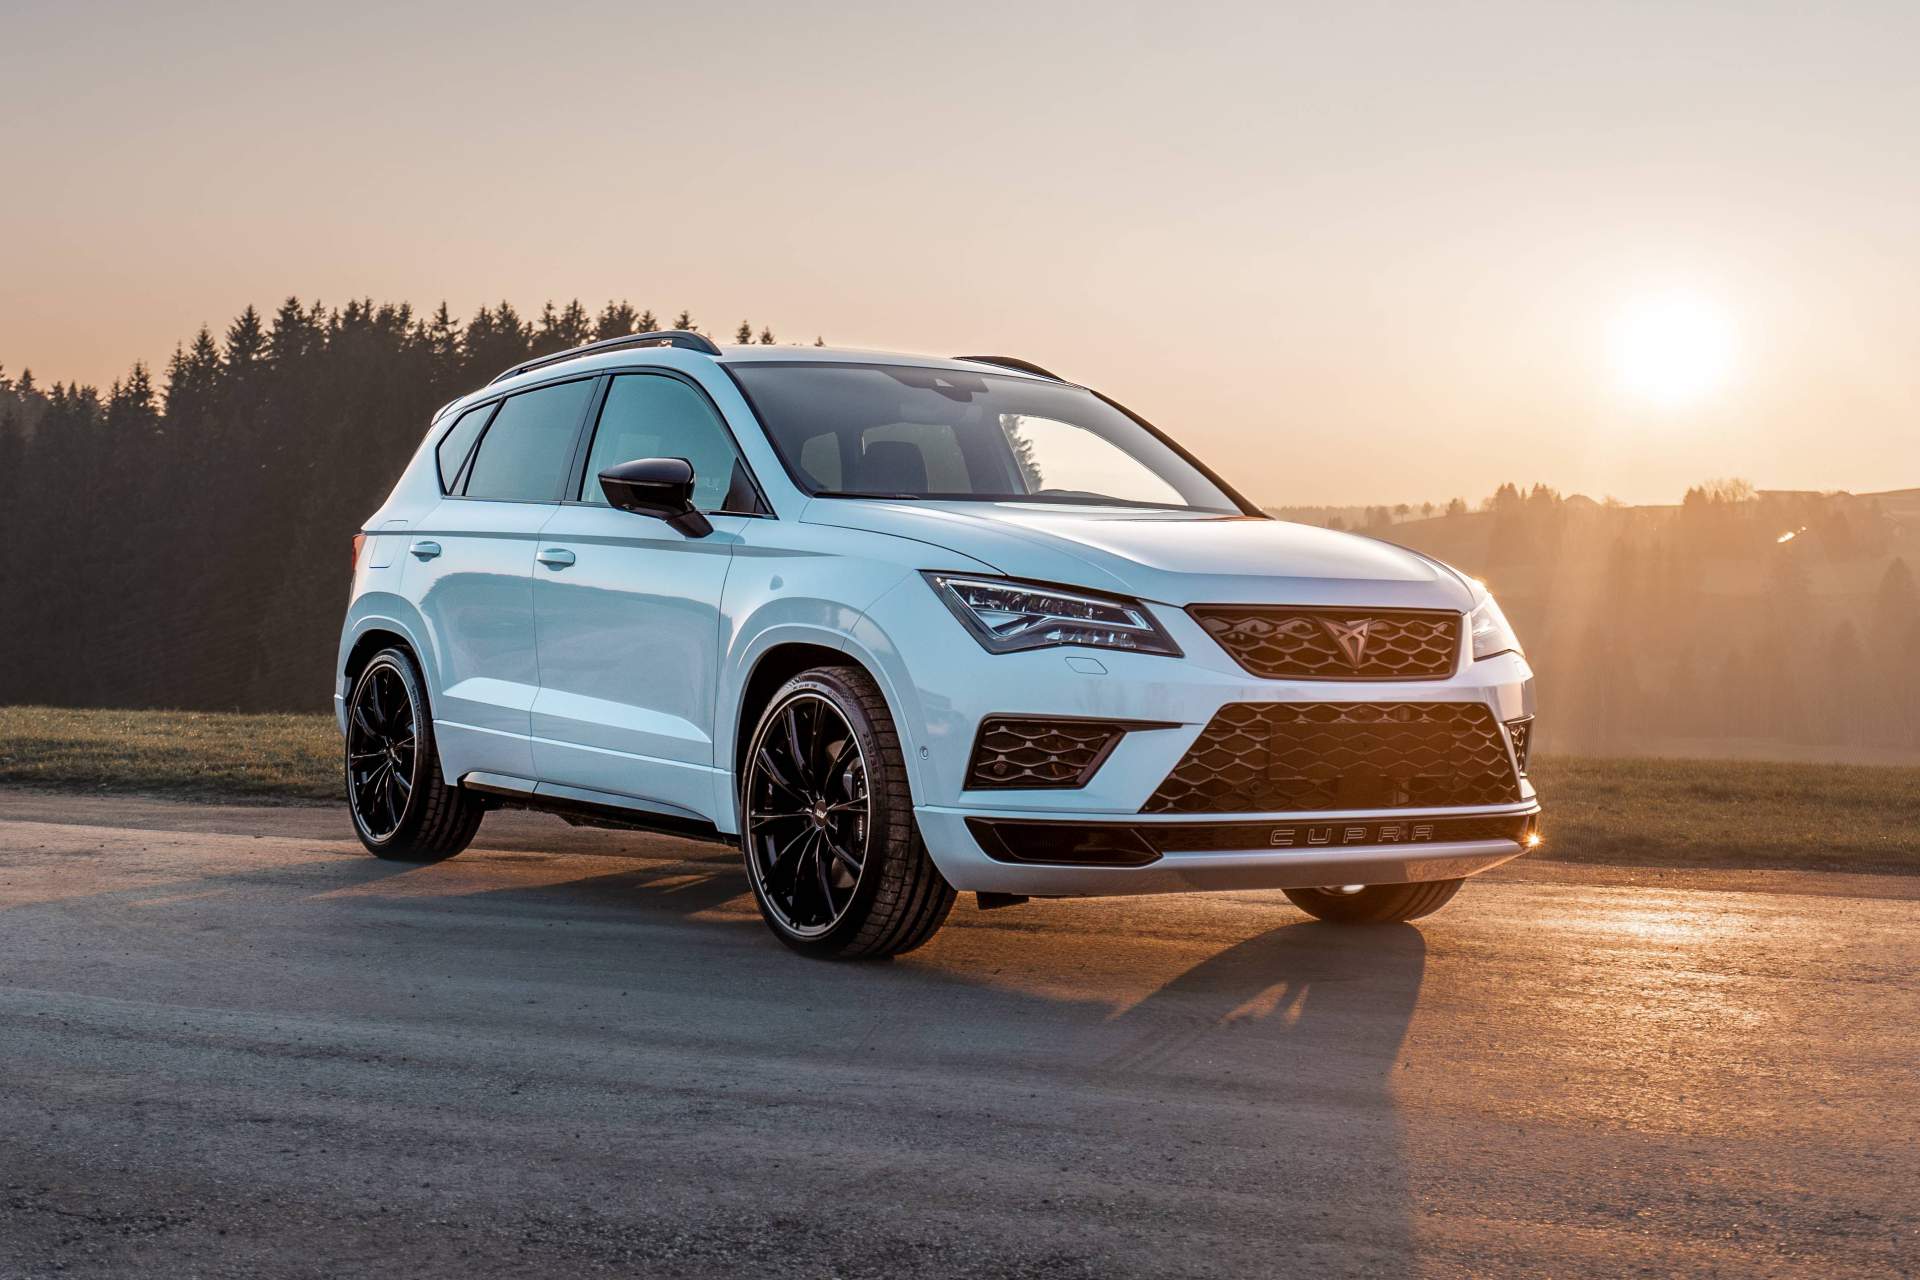 Limited – but not the limit: ABT makes special CUPRA Ateca even sportier -  Audi Tuning, VW Tuning, Chiptuning von ABT Sportsline.